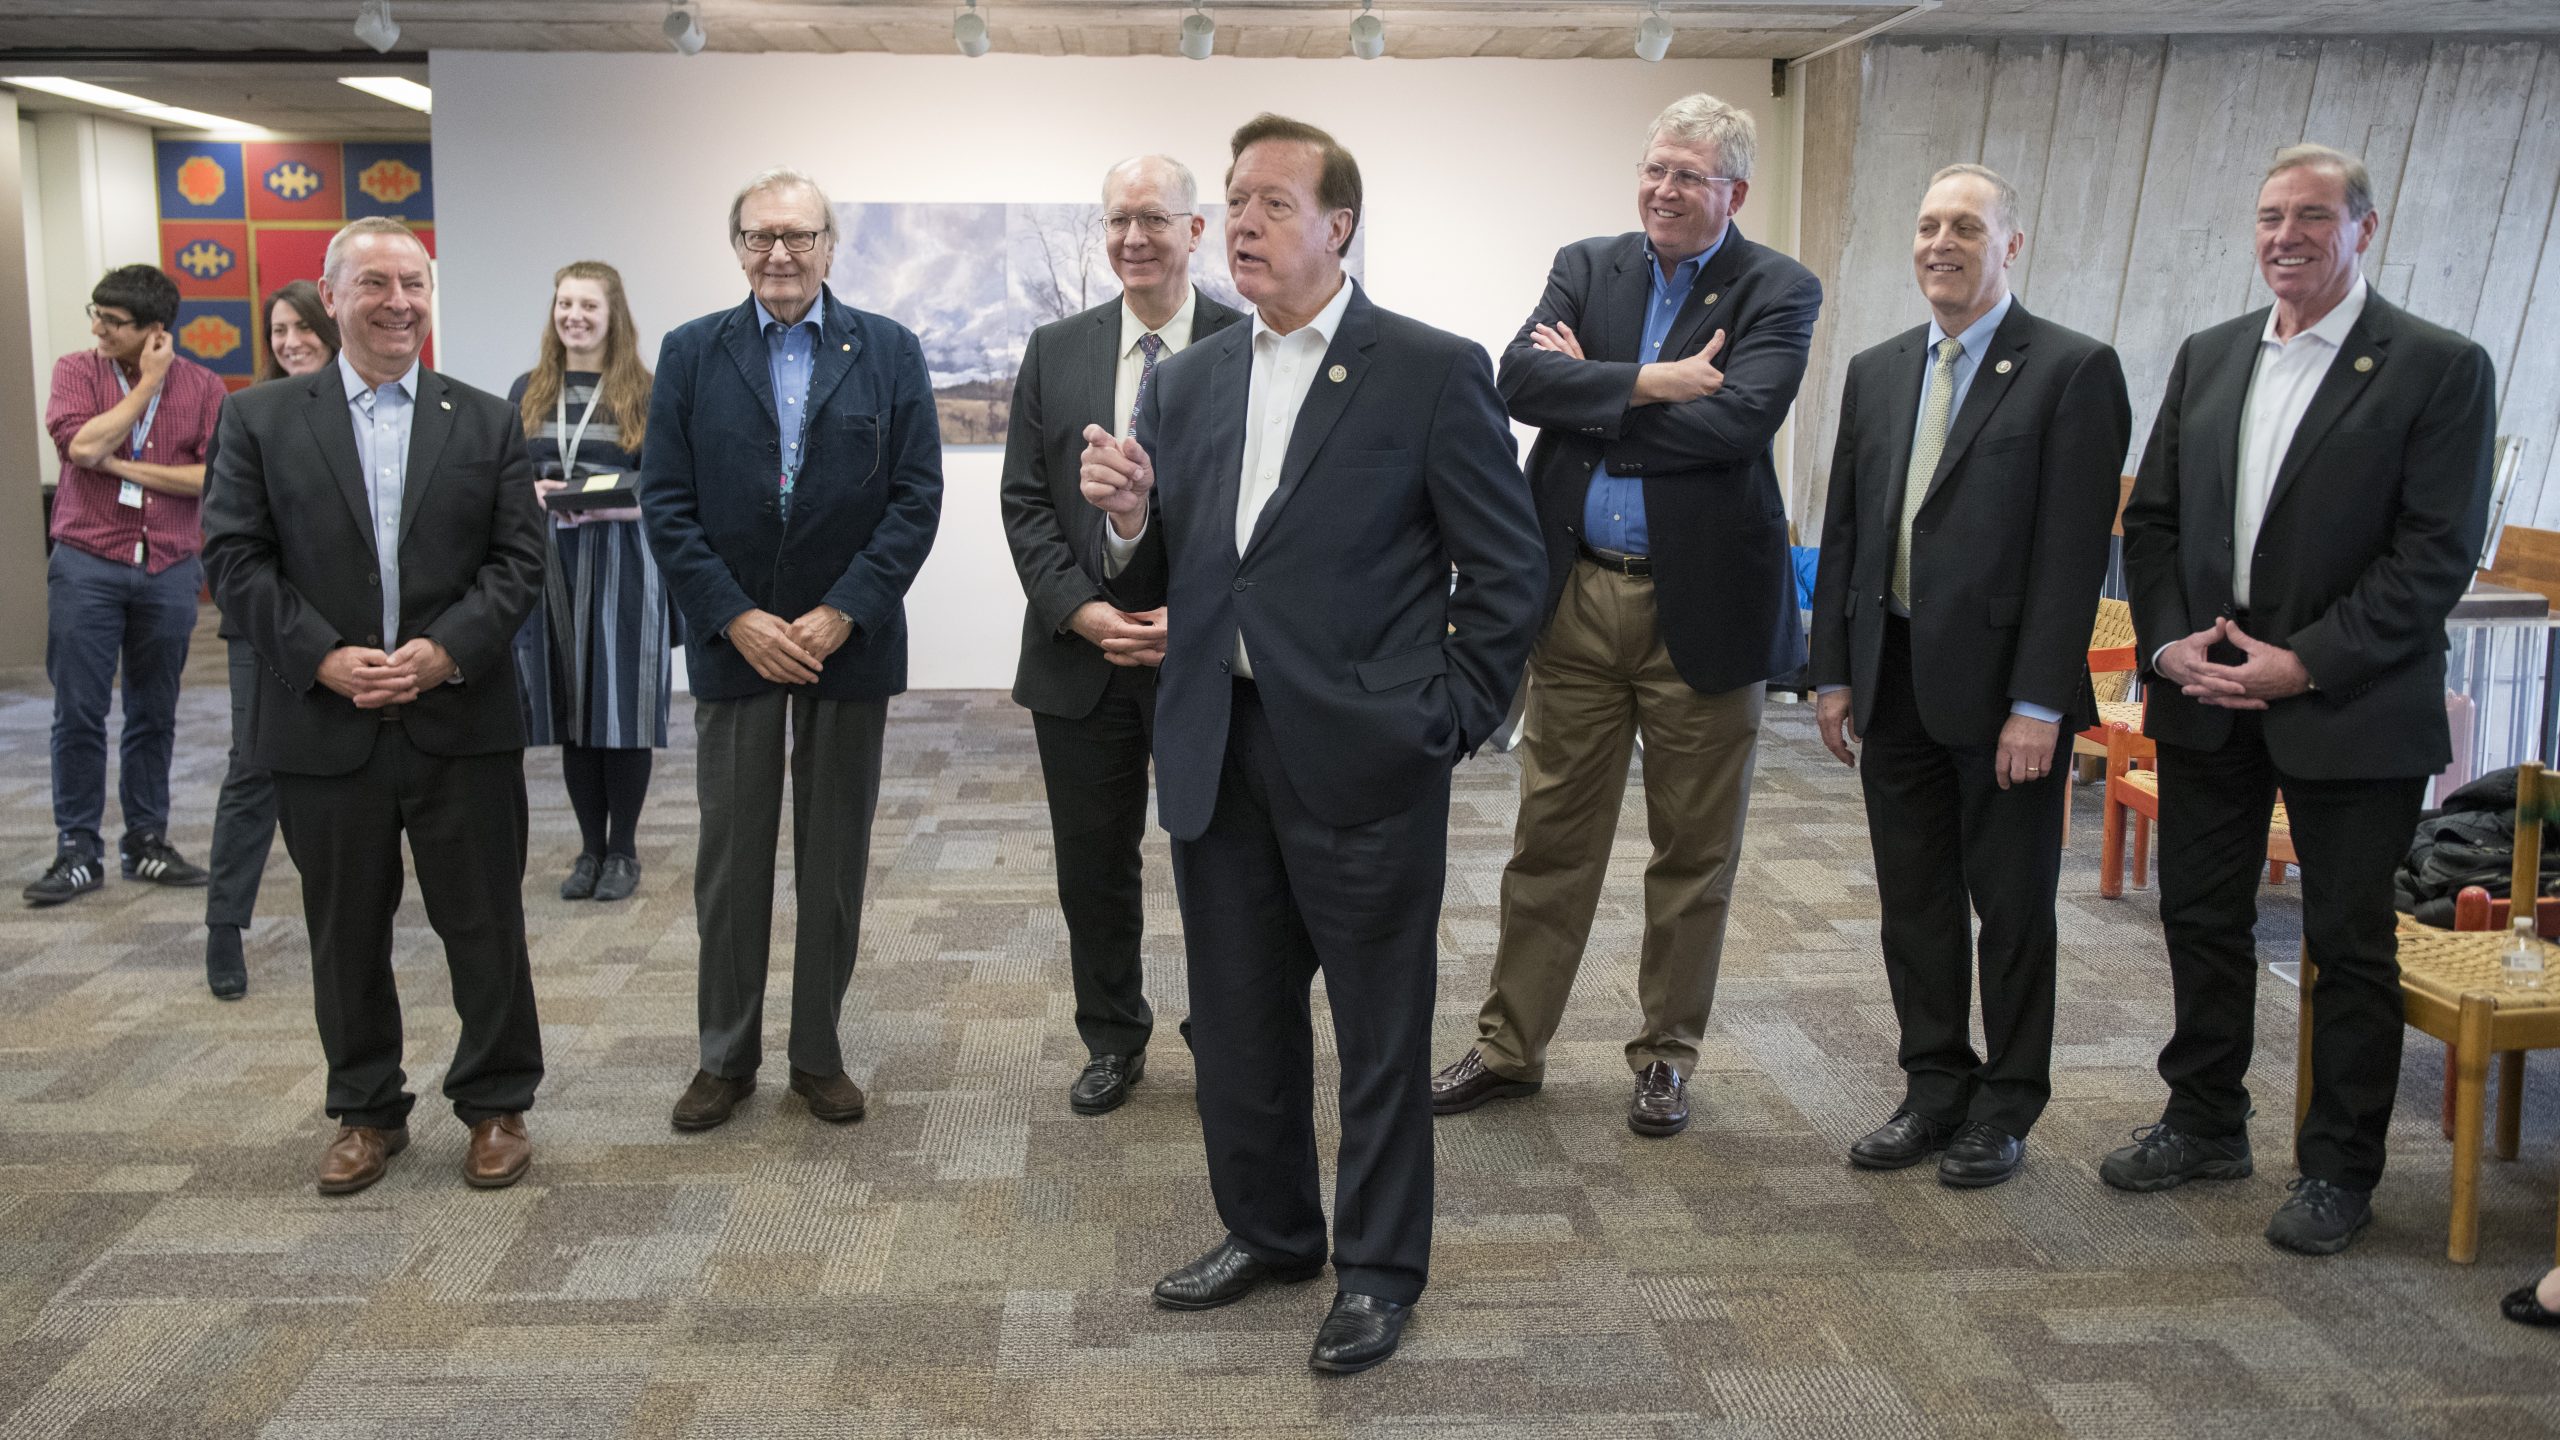 Congressman Randy Weber, chair of the Energy Subcommittee of the House Science Committee, congratulated about 100 Saturday Morning Physics students at their graduation ceremony when he and four other members of the House Science Committee visited Fermilab on May 12, 2018. From left: Fermilab Director Nigel Lockyer, Nobel laureate Carlo Rubbia, Congressman Bill Foster, D-Illinois, Congressman Randy Weber, R-Texas, Congressman Frank Lucas, R-Oklahoma; Congressman Andy Biggs, R-Arizona; Congressman Neal Dunn, R-Florida. Photo: Reidar Hahn